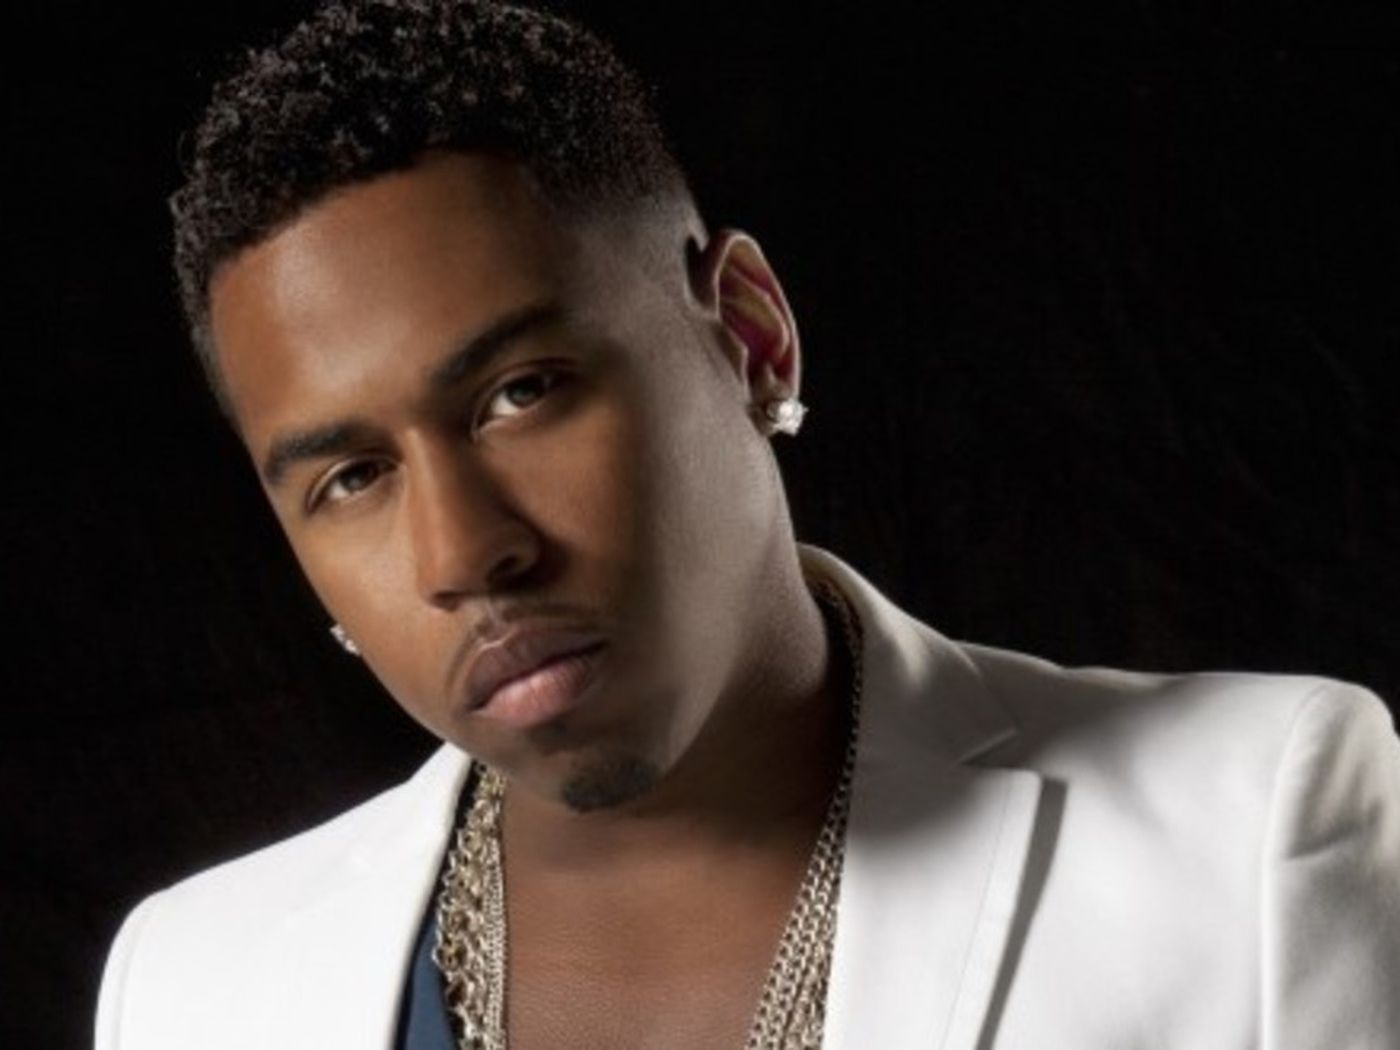 bobby valentino right there - cloudridernetworks.com.